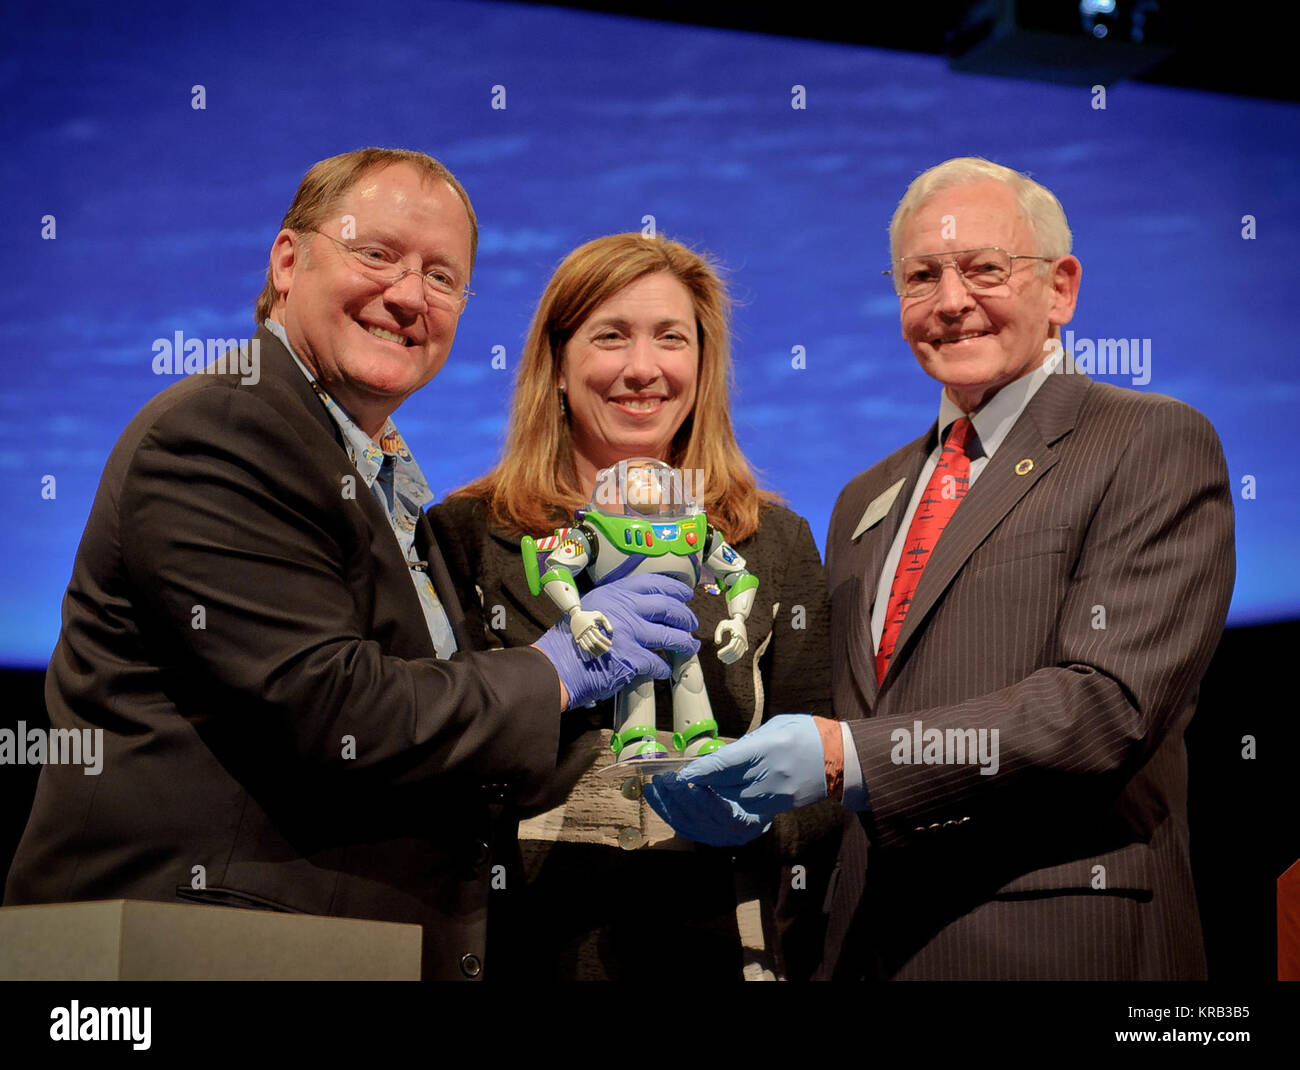 John Lasseter, Director of the film 'Toy Story', left, NASA Deputy Administrator Lori Garver, and Gen. J.R. 'Jack' Dailey, right, hold Buzz Lightyear of the film at the Smithsonian National Air and Space Museum's Moving Beyond Earth Gallery, Thursday, March 29, 2012, in Washington. Launched May 31, 2008 aboard the space shuttle Discovery (STS-124) and returned on Discovery 15 months later with STS-128, the 12-inch action figure is the longest serving toy in space and became part of the museum's popular culture collection. Photo Credit: (NASA/Paul E. Alers) John Lasseter, Lori Garver, J.R. 22Ja Stock Photo